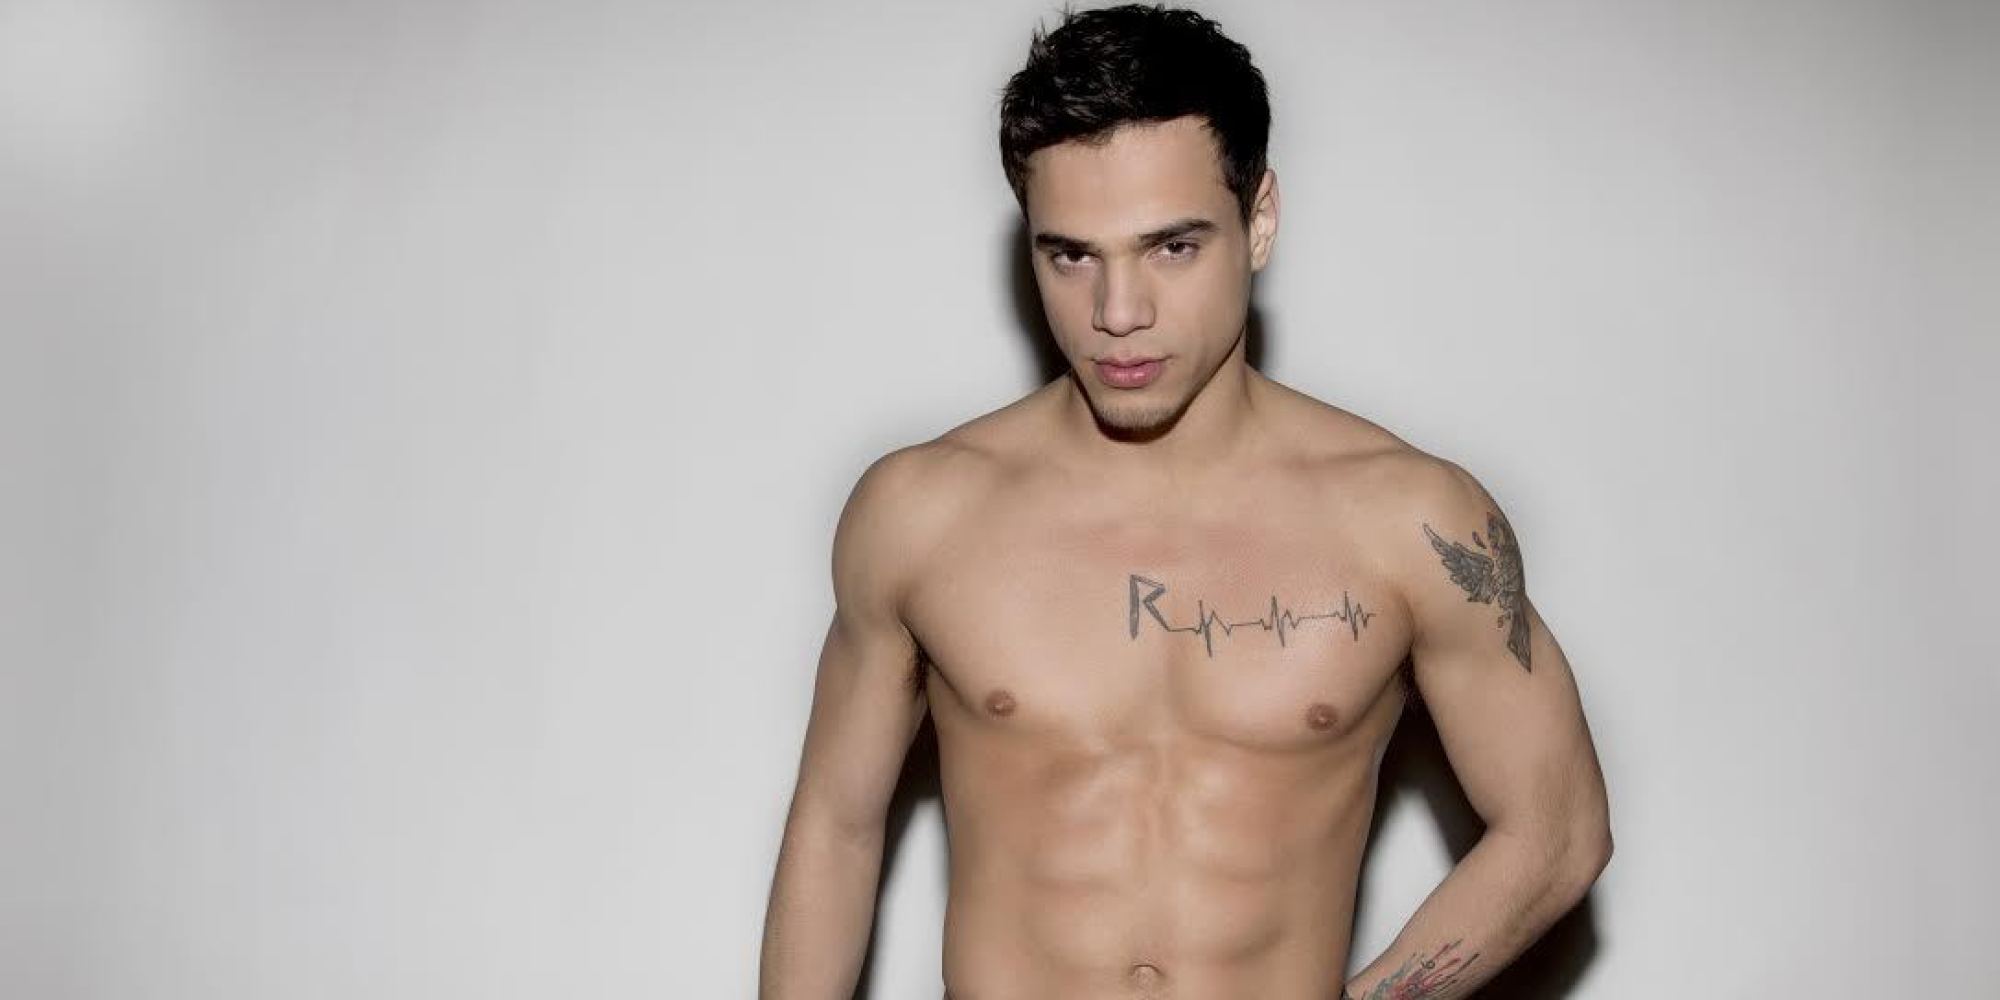 Porn Star Levi Karter Talks Tattoos What He And Rihanna Have In Common And His Dream Date With